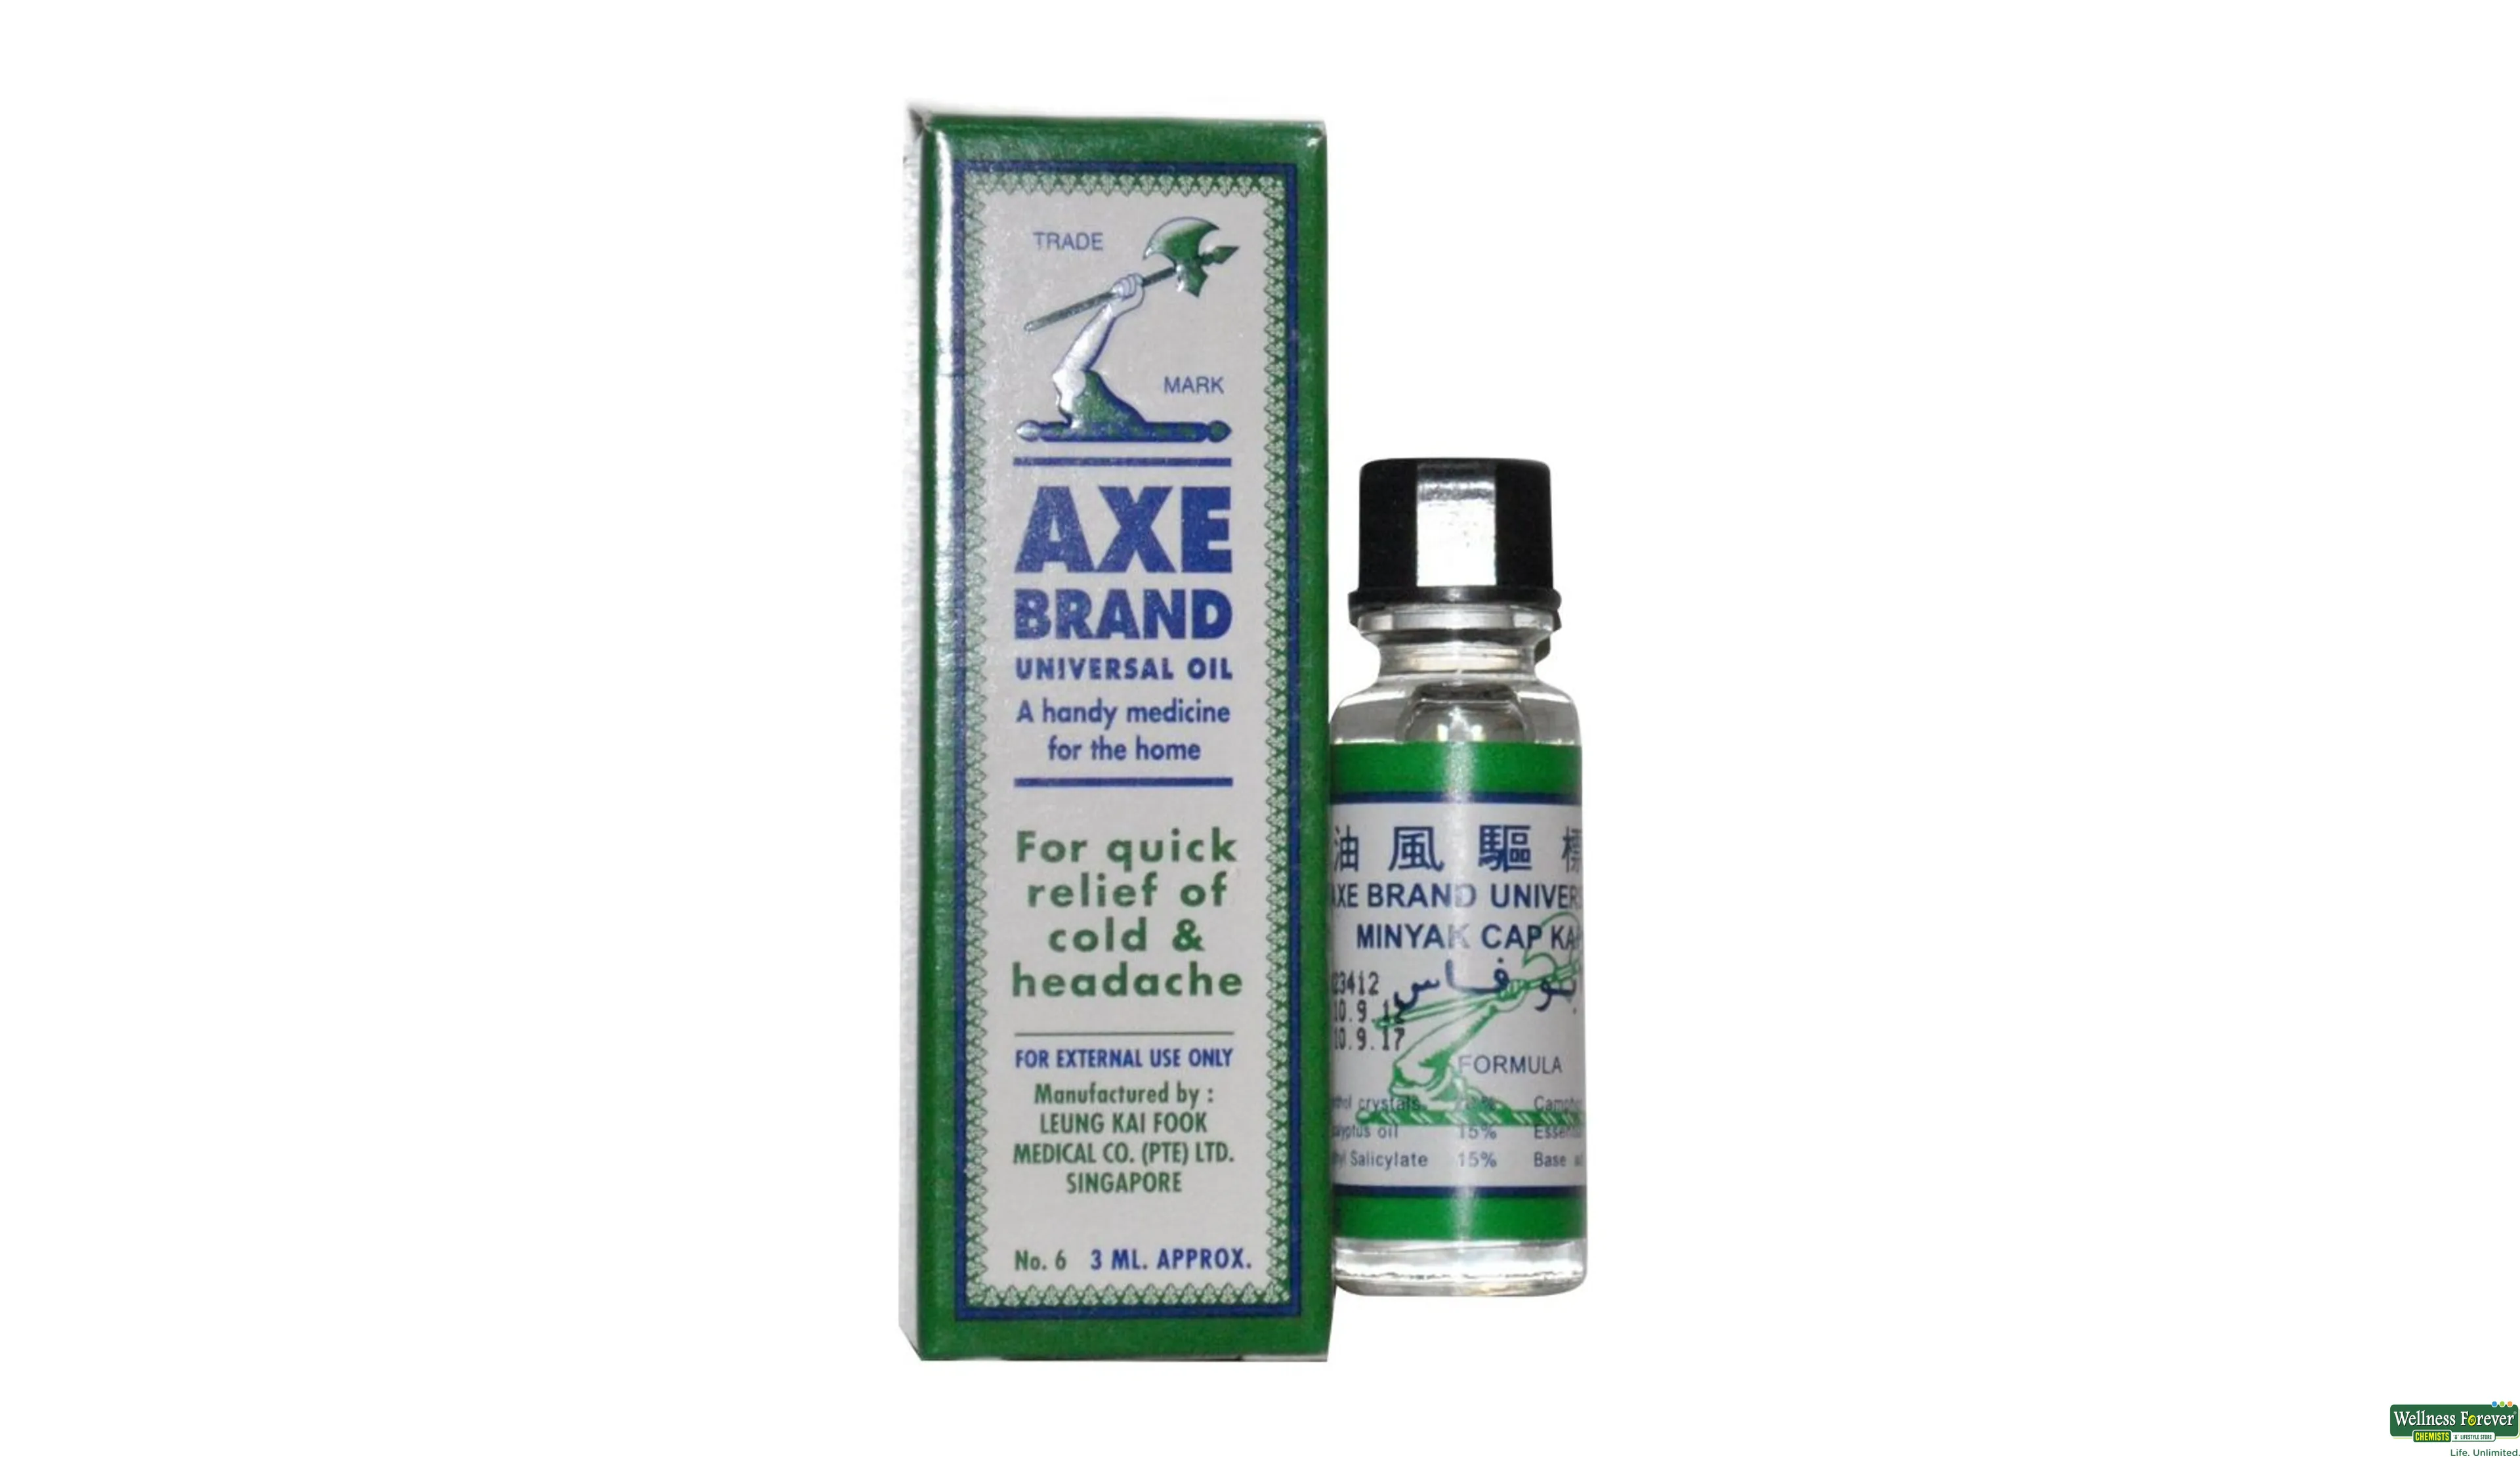 Buy Axe Brand Universal Oil, 3 ml Online at Best Prices